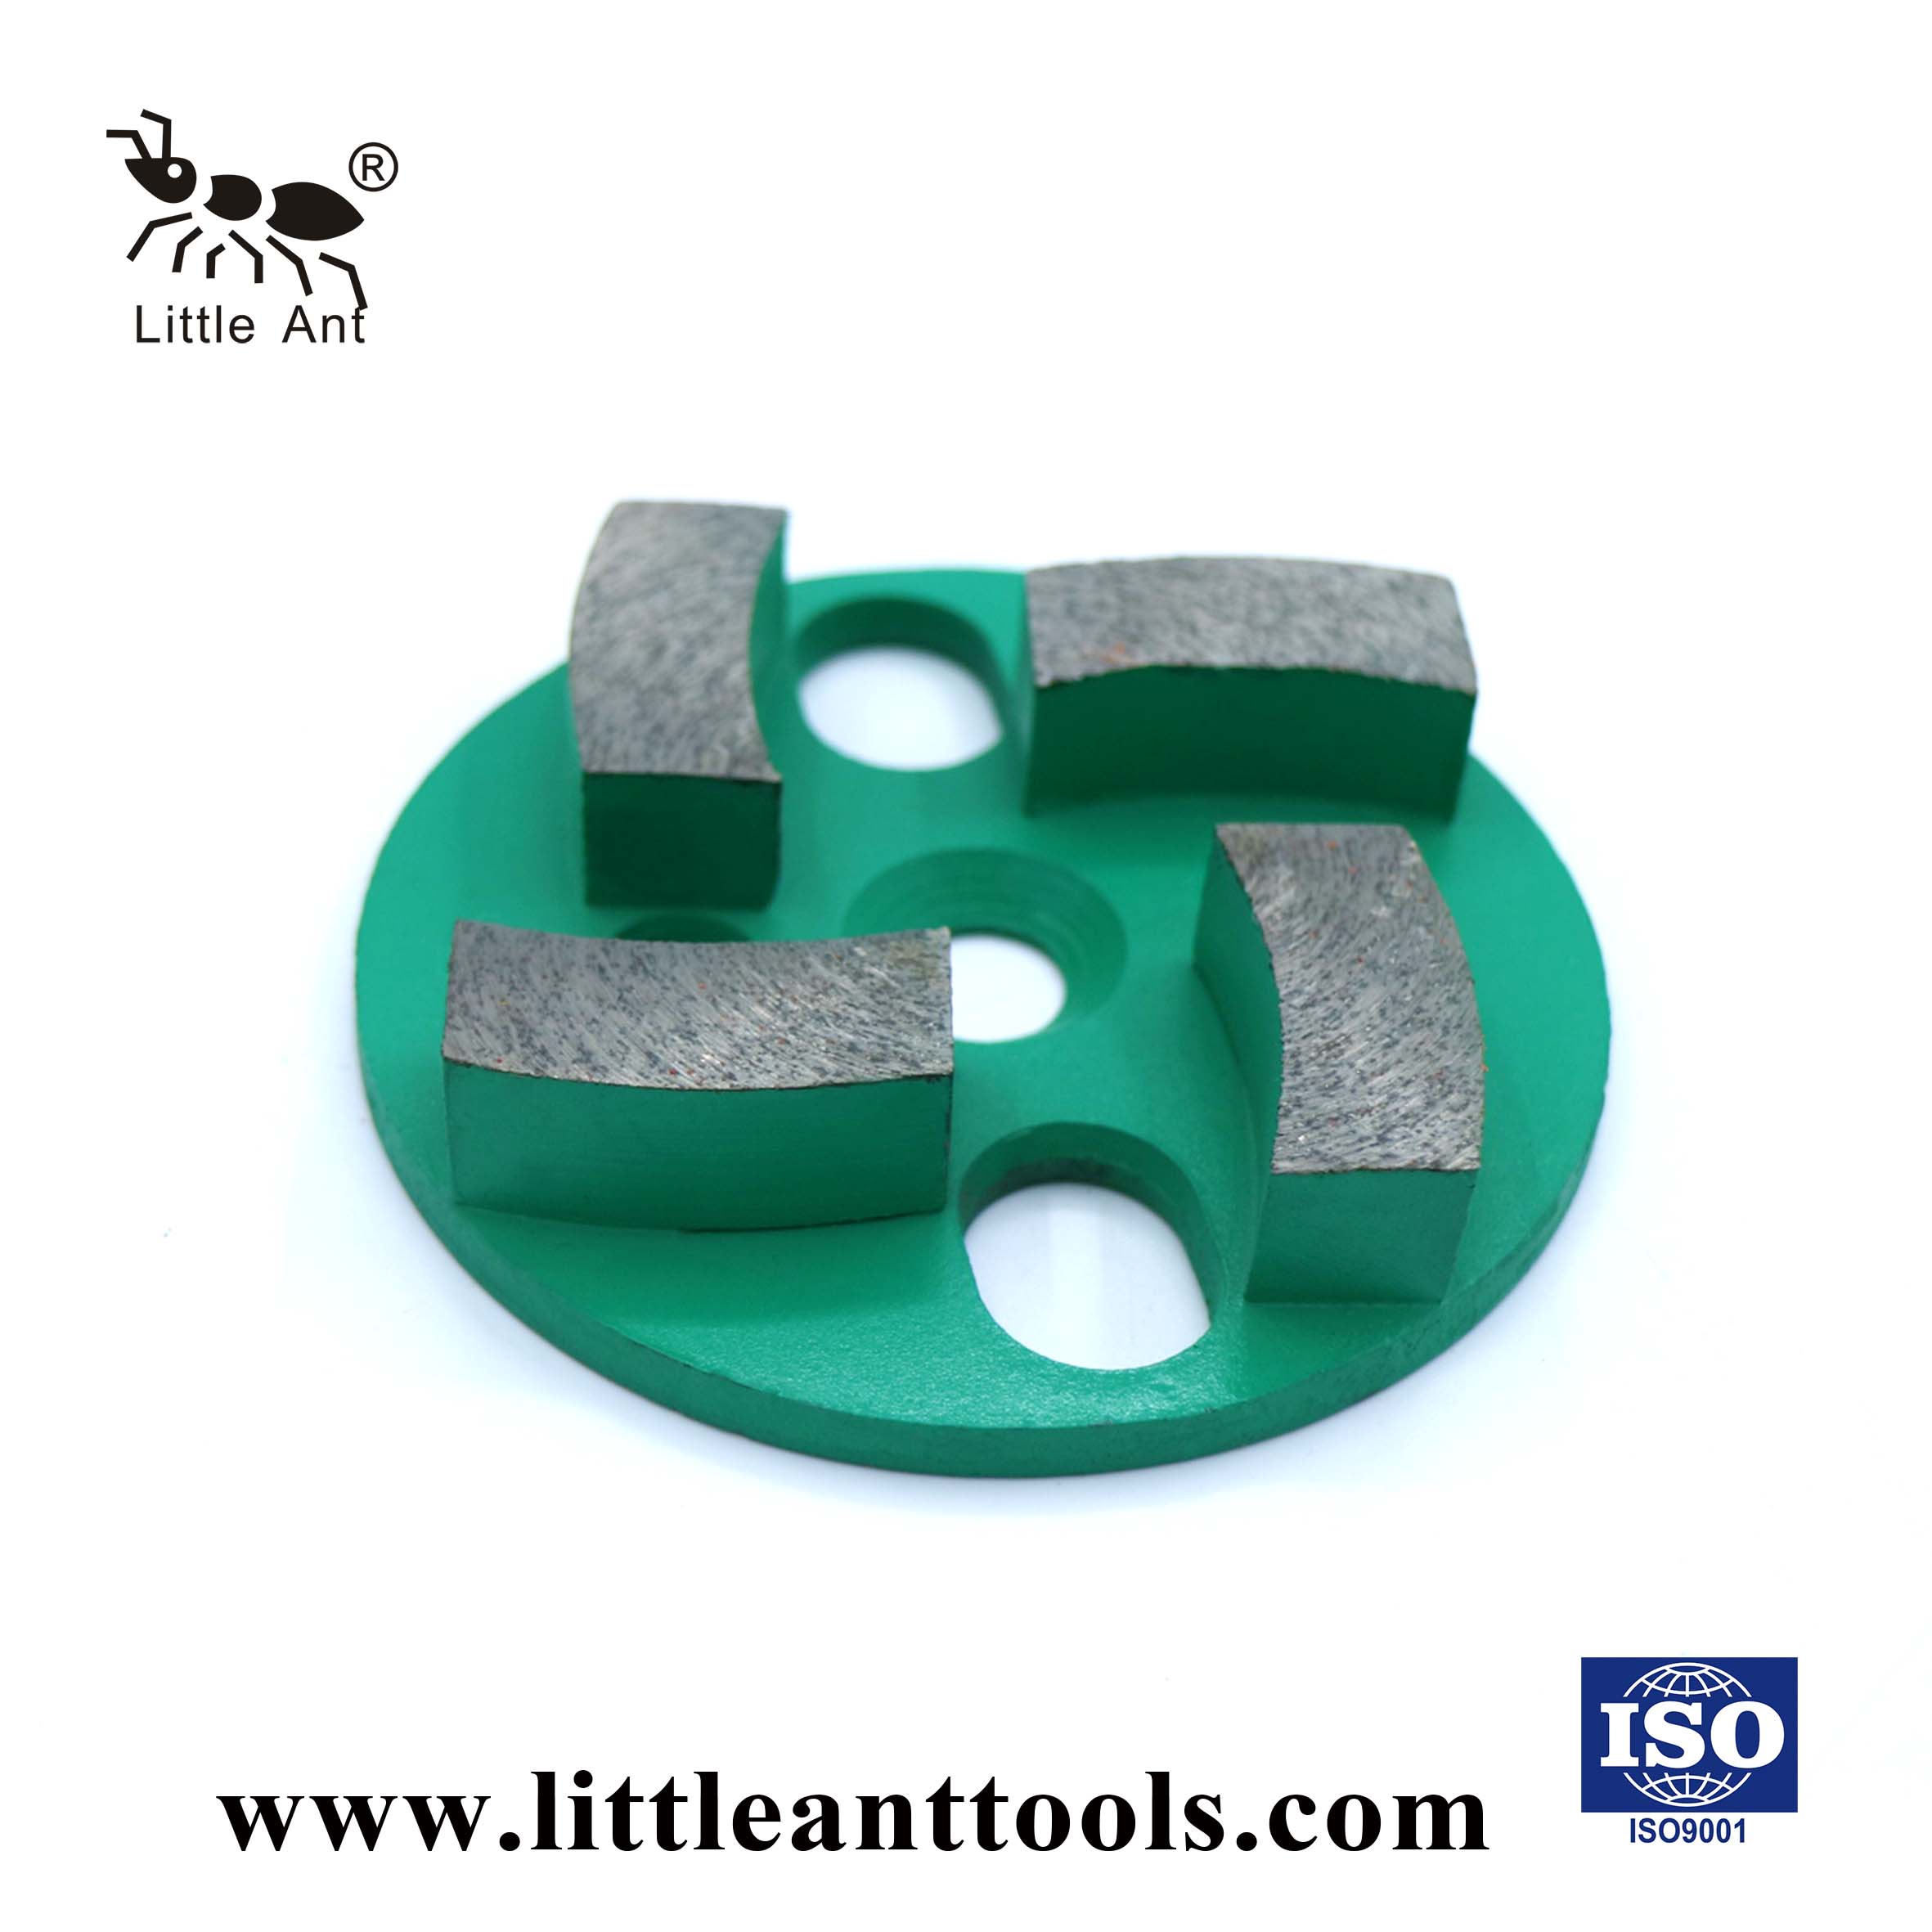 LITTLE ANT Circular Grinding Plate Metal Tool for Concrete Dry And Wet Use 4 Arc-shaped Gears 100mm